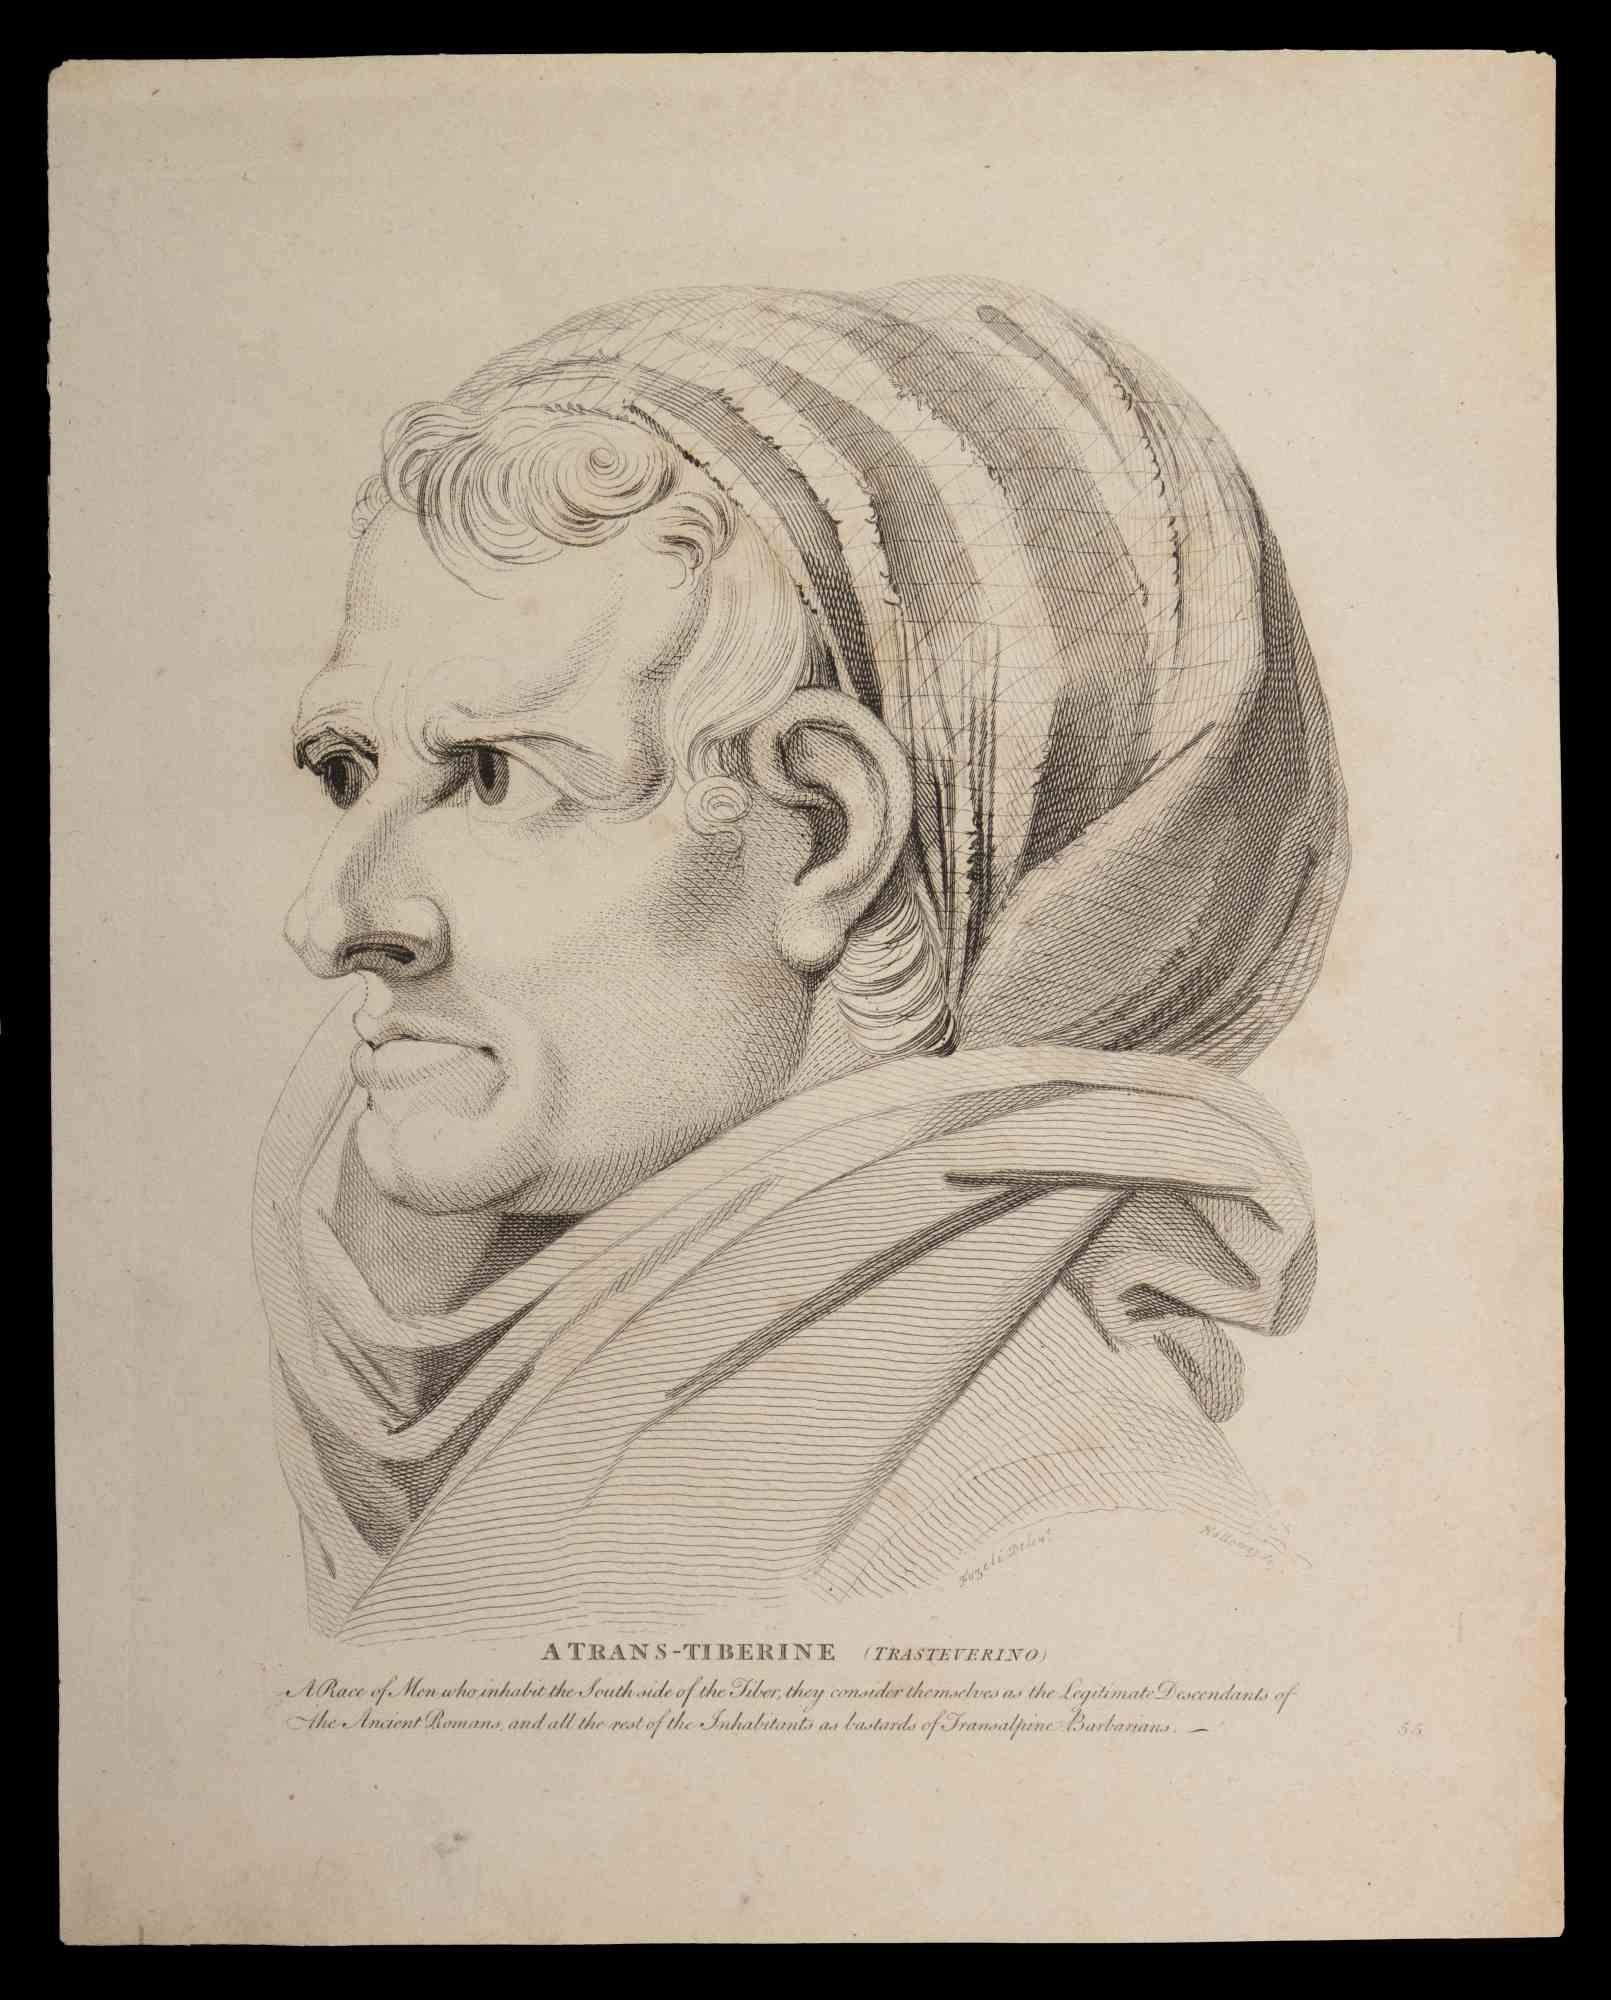 Atran-Tiberine is an original etching artwork realized by Thomas Holloway for Johann Caspar Lavater's "Essays on Physiognomy, Designed to Promote the Knowledge and the Love of Mankind", London, Bensley, 1810. 

Titled on the lower center with the